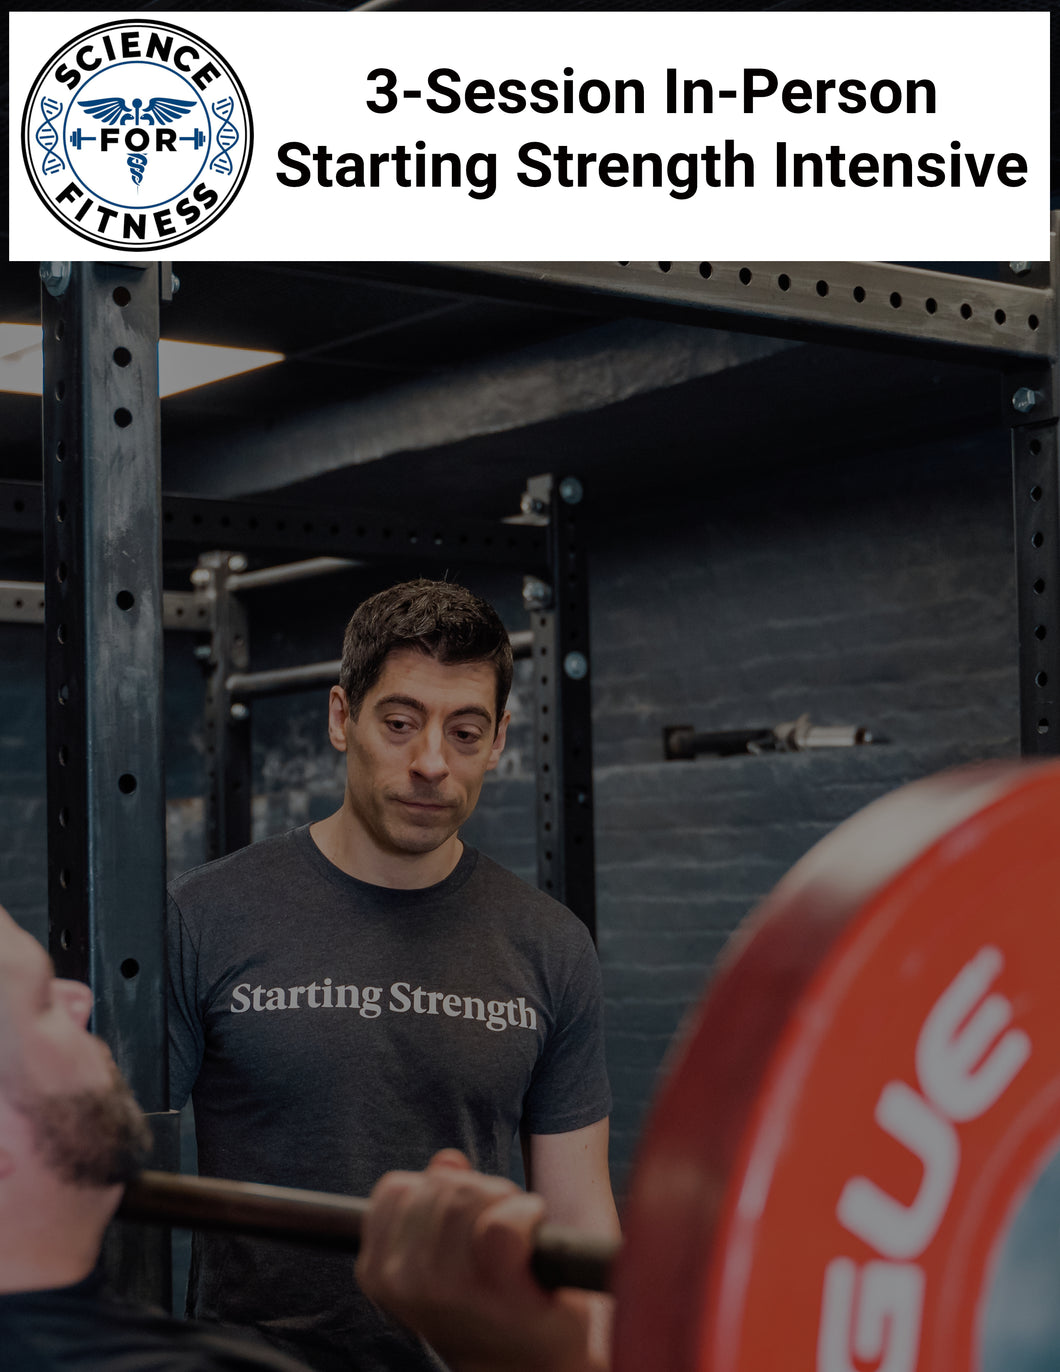 3-Session In-Person Starting Strength Intensive